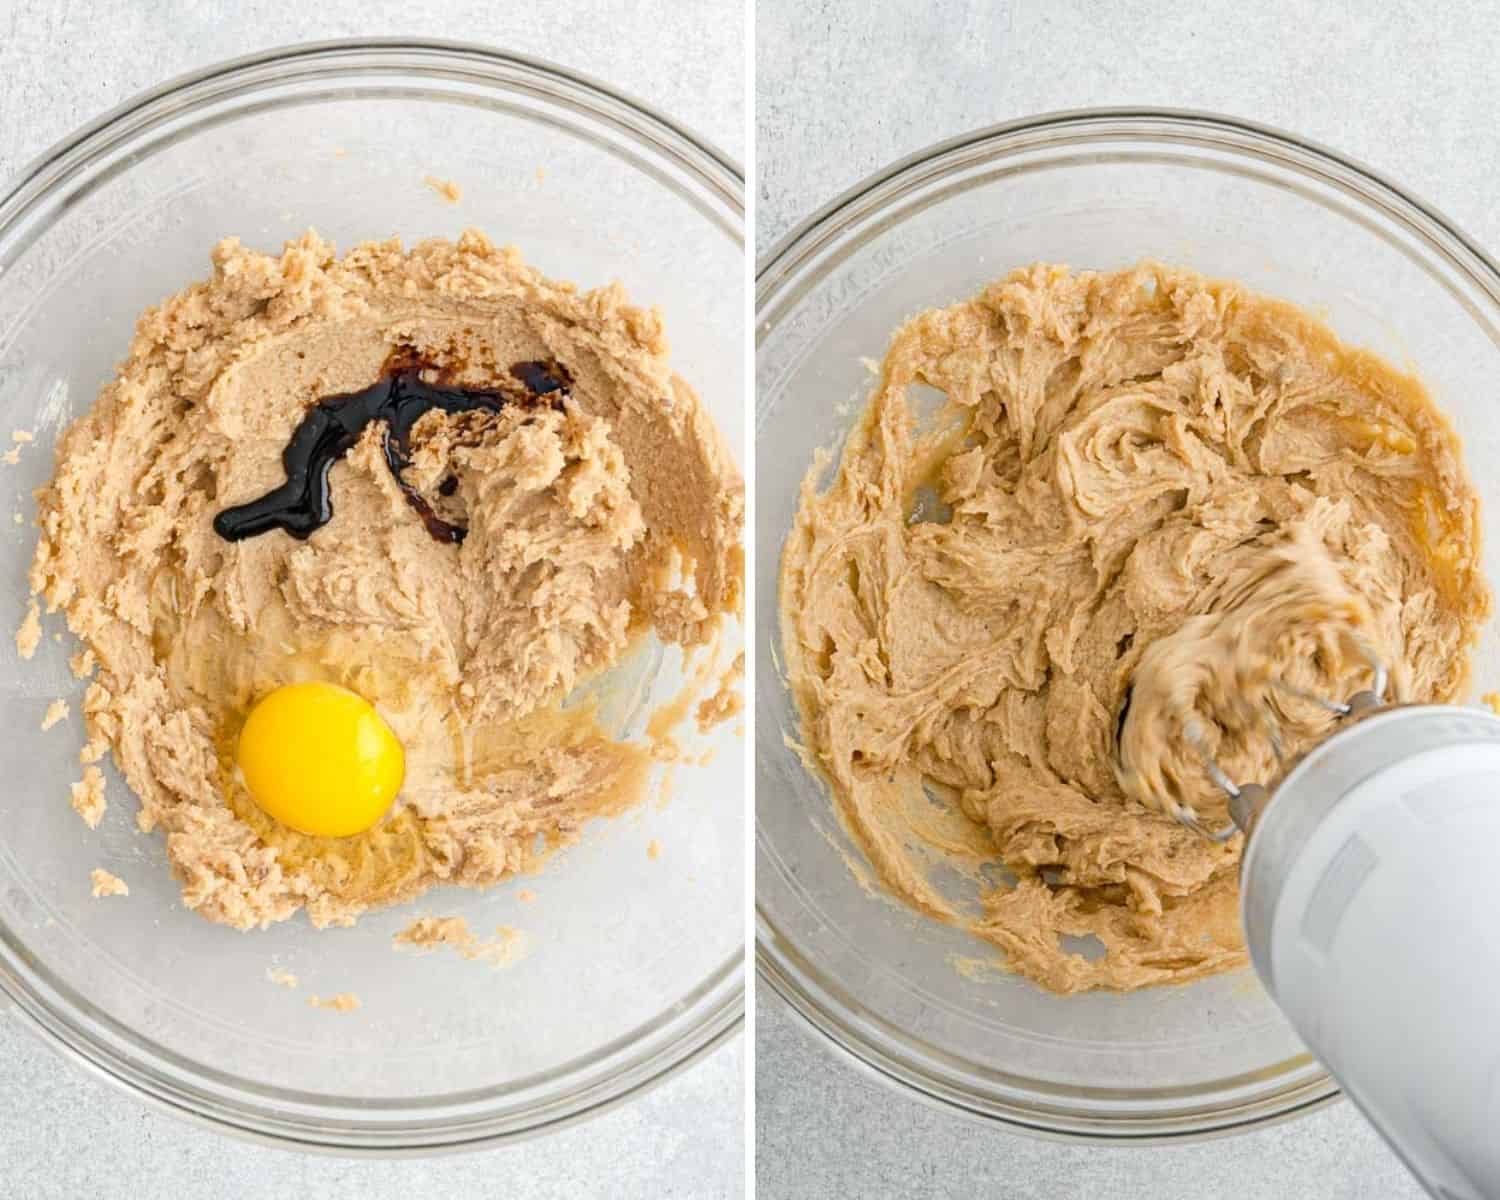 Cookie wet ingredients before and after mixing.